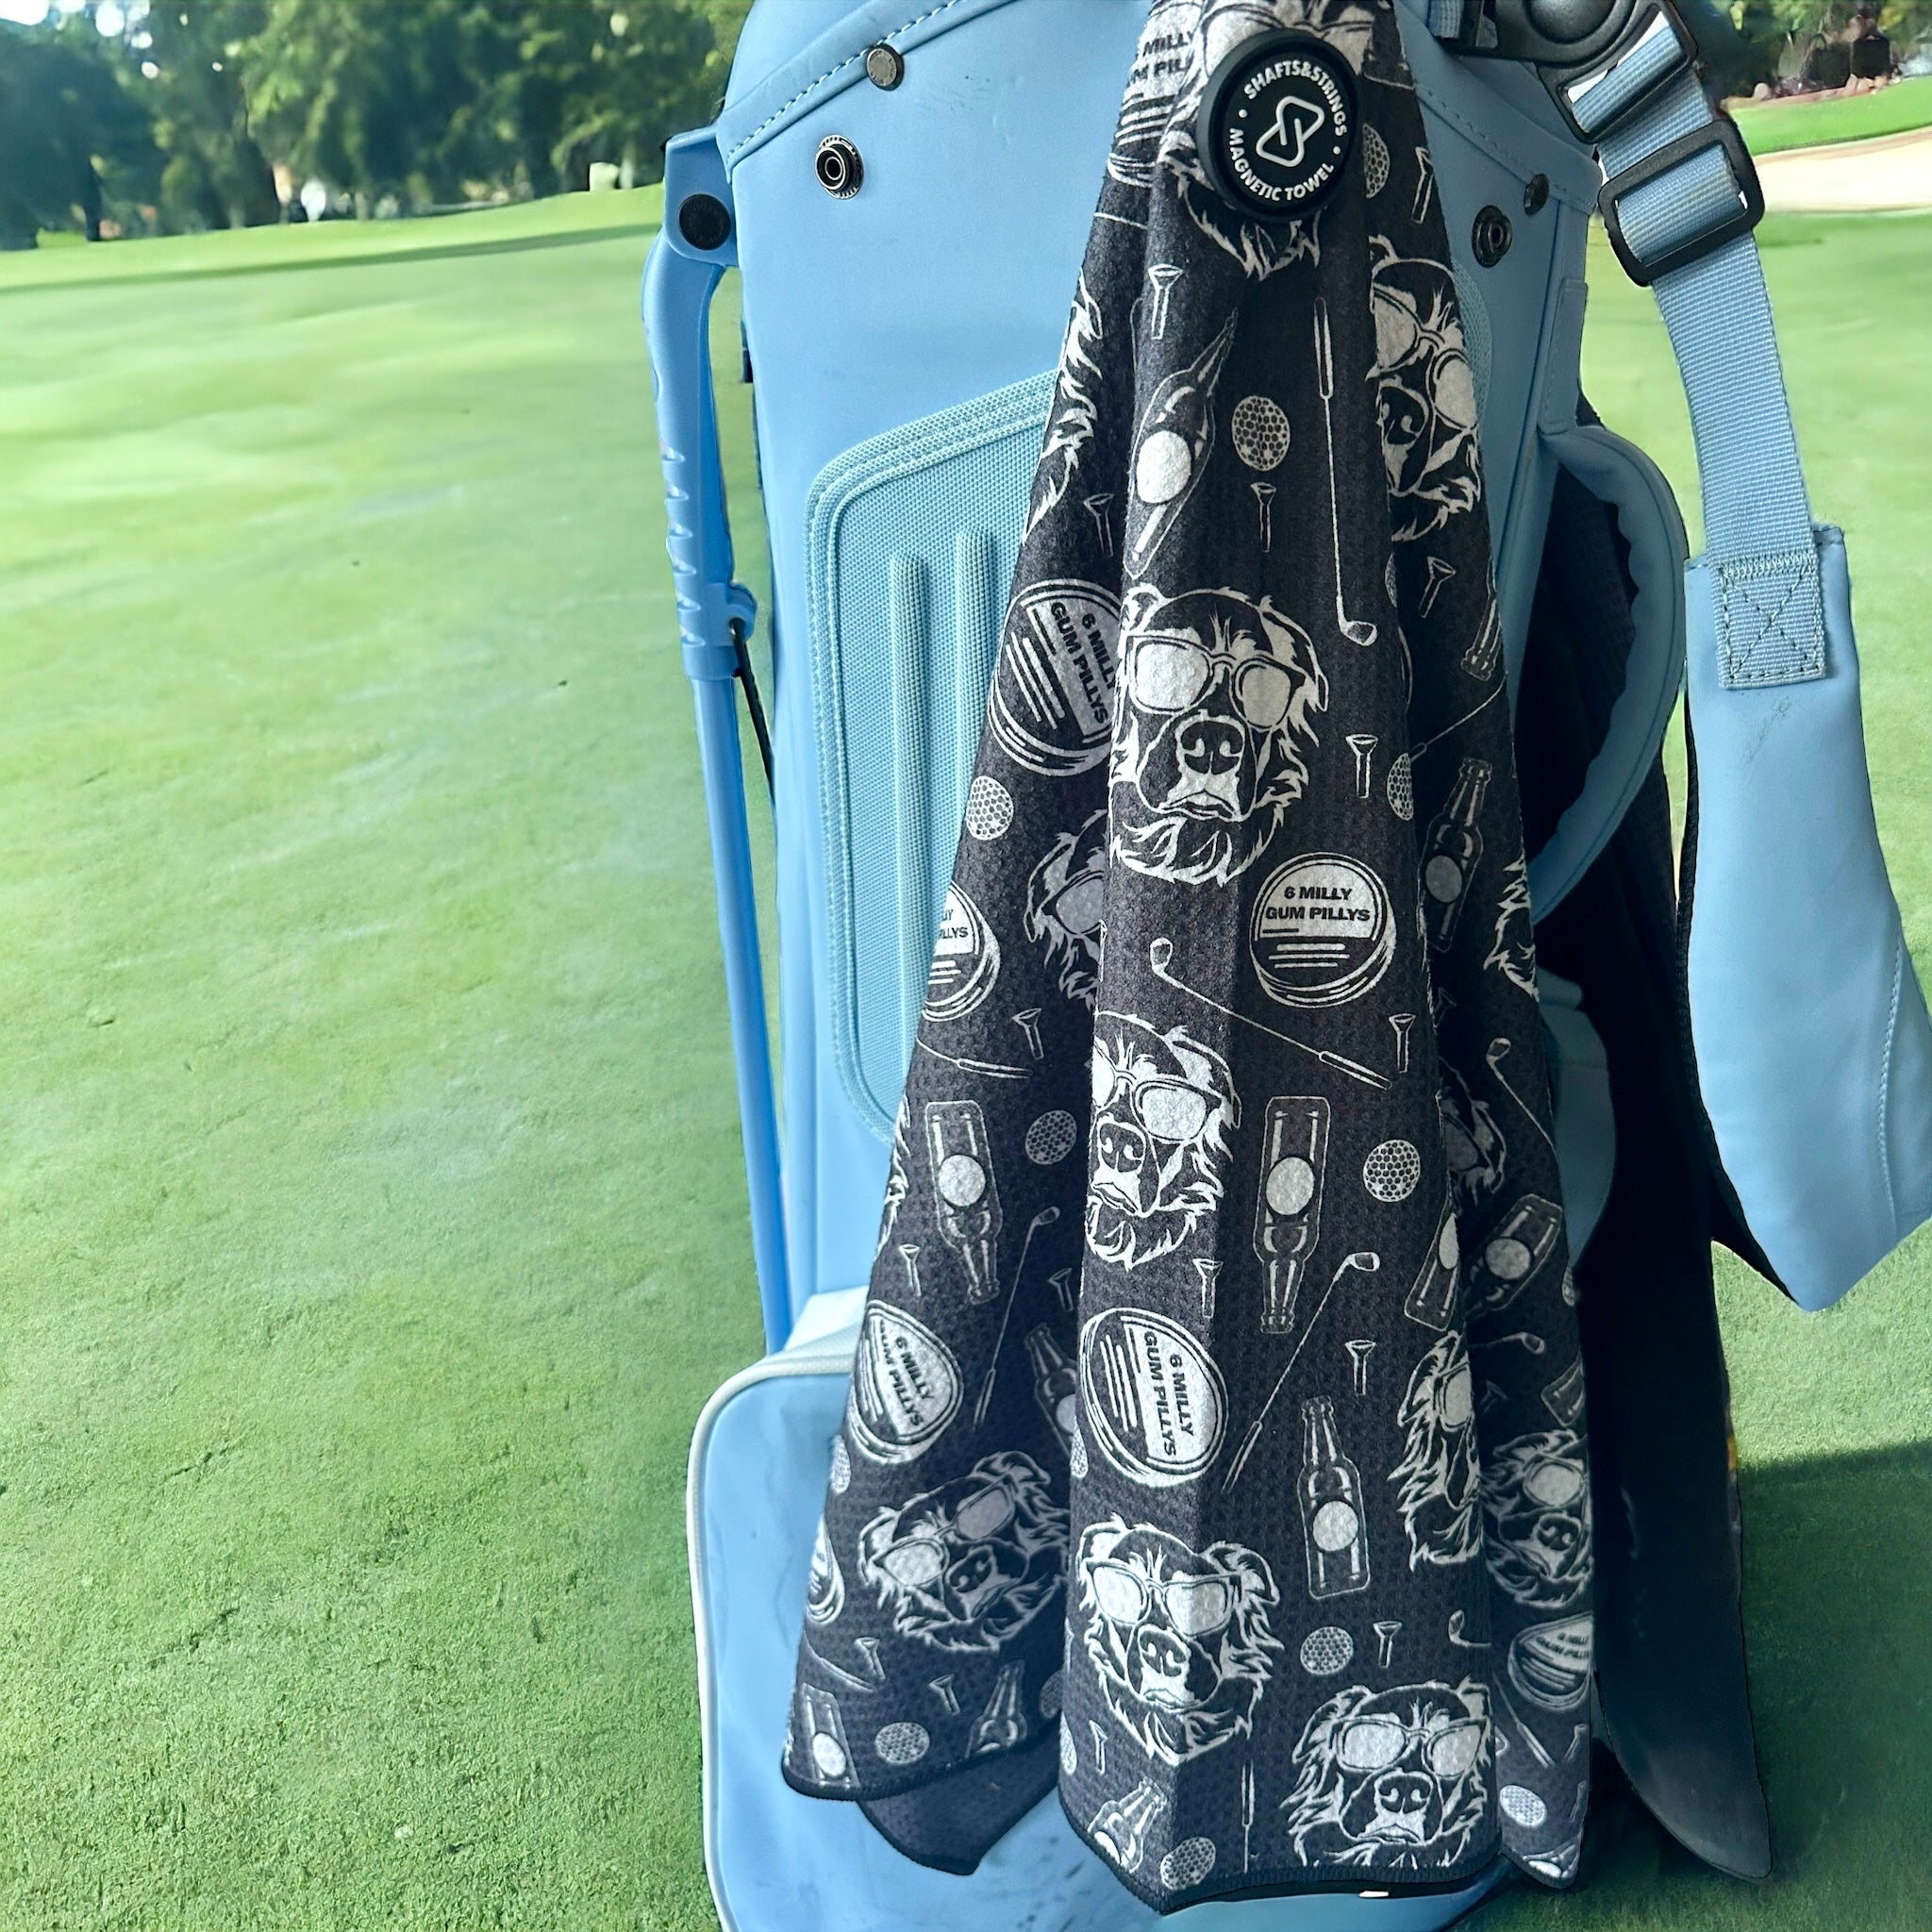 6 Milly Pilly - Magnetic Golf Towel